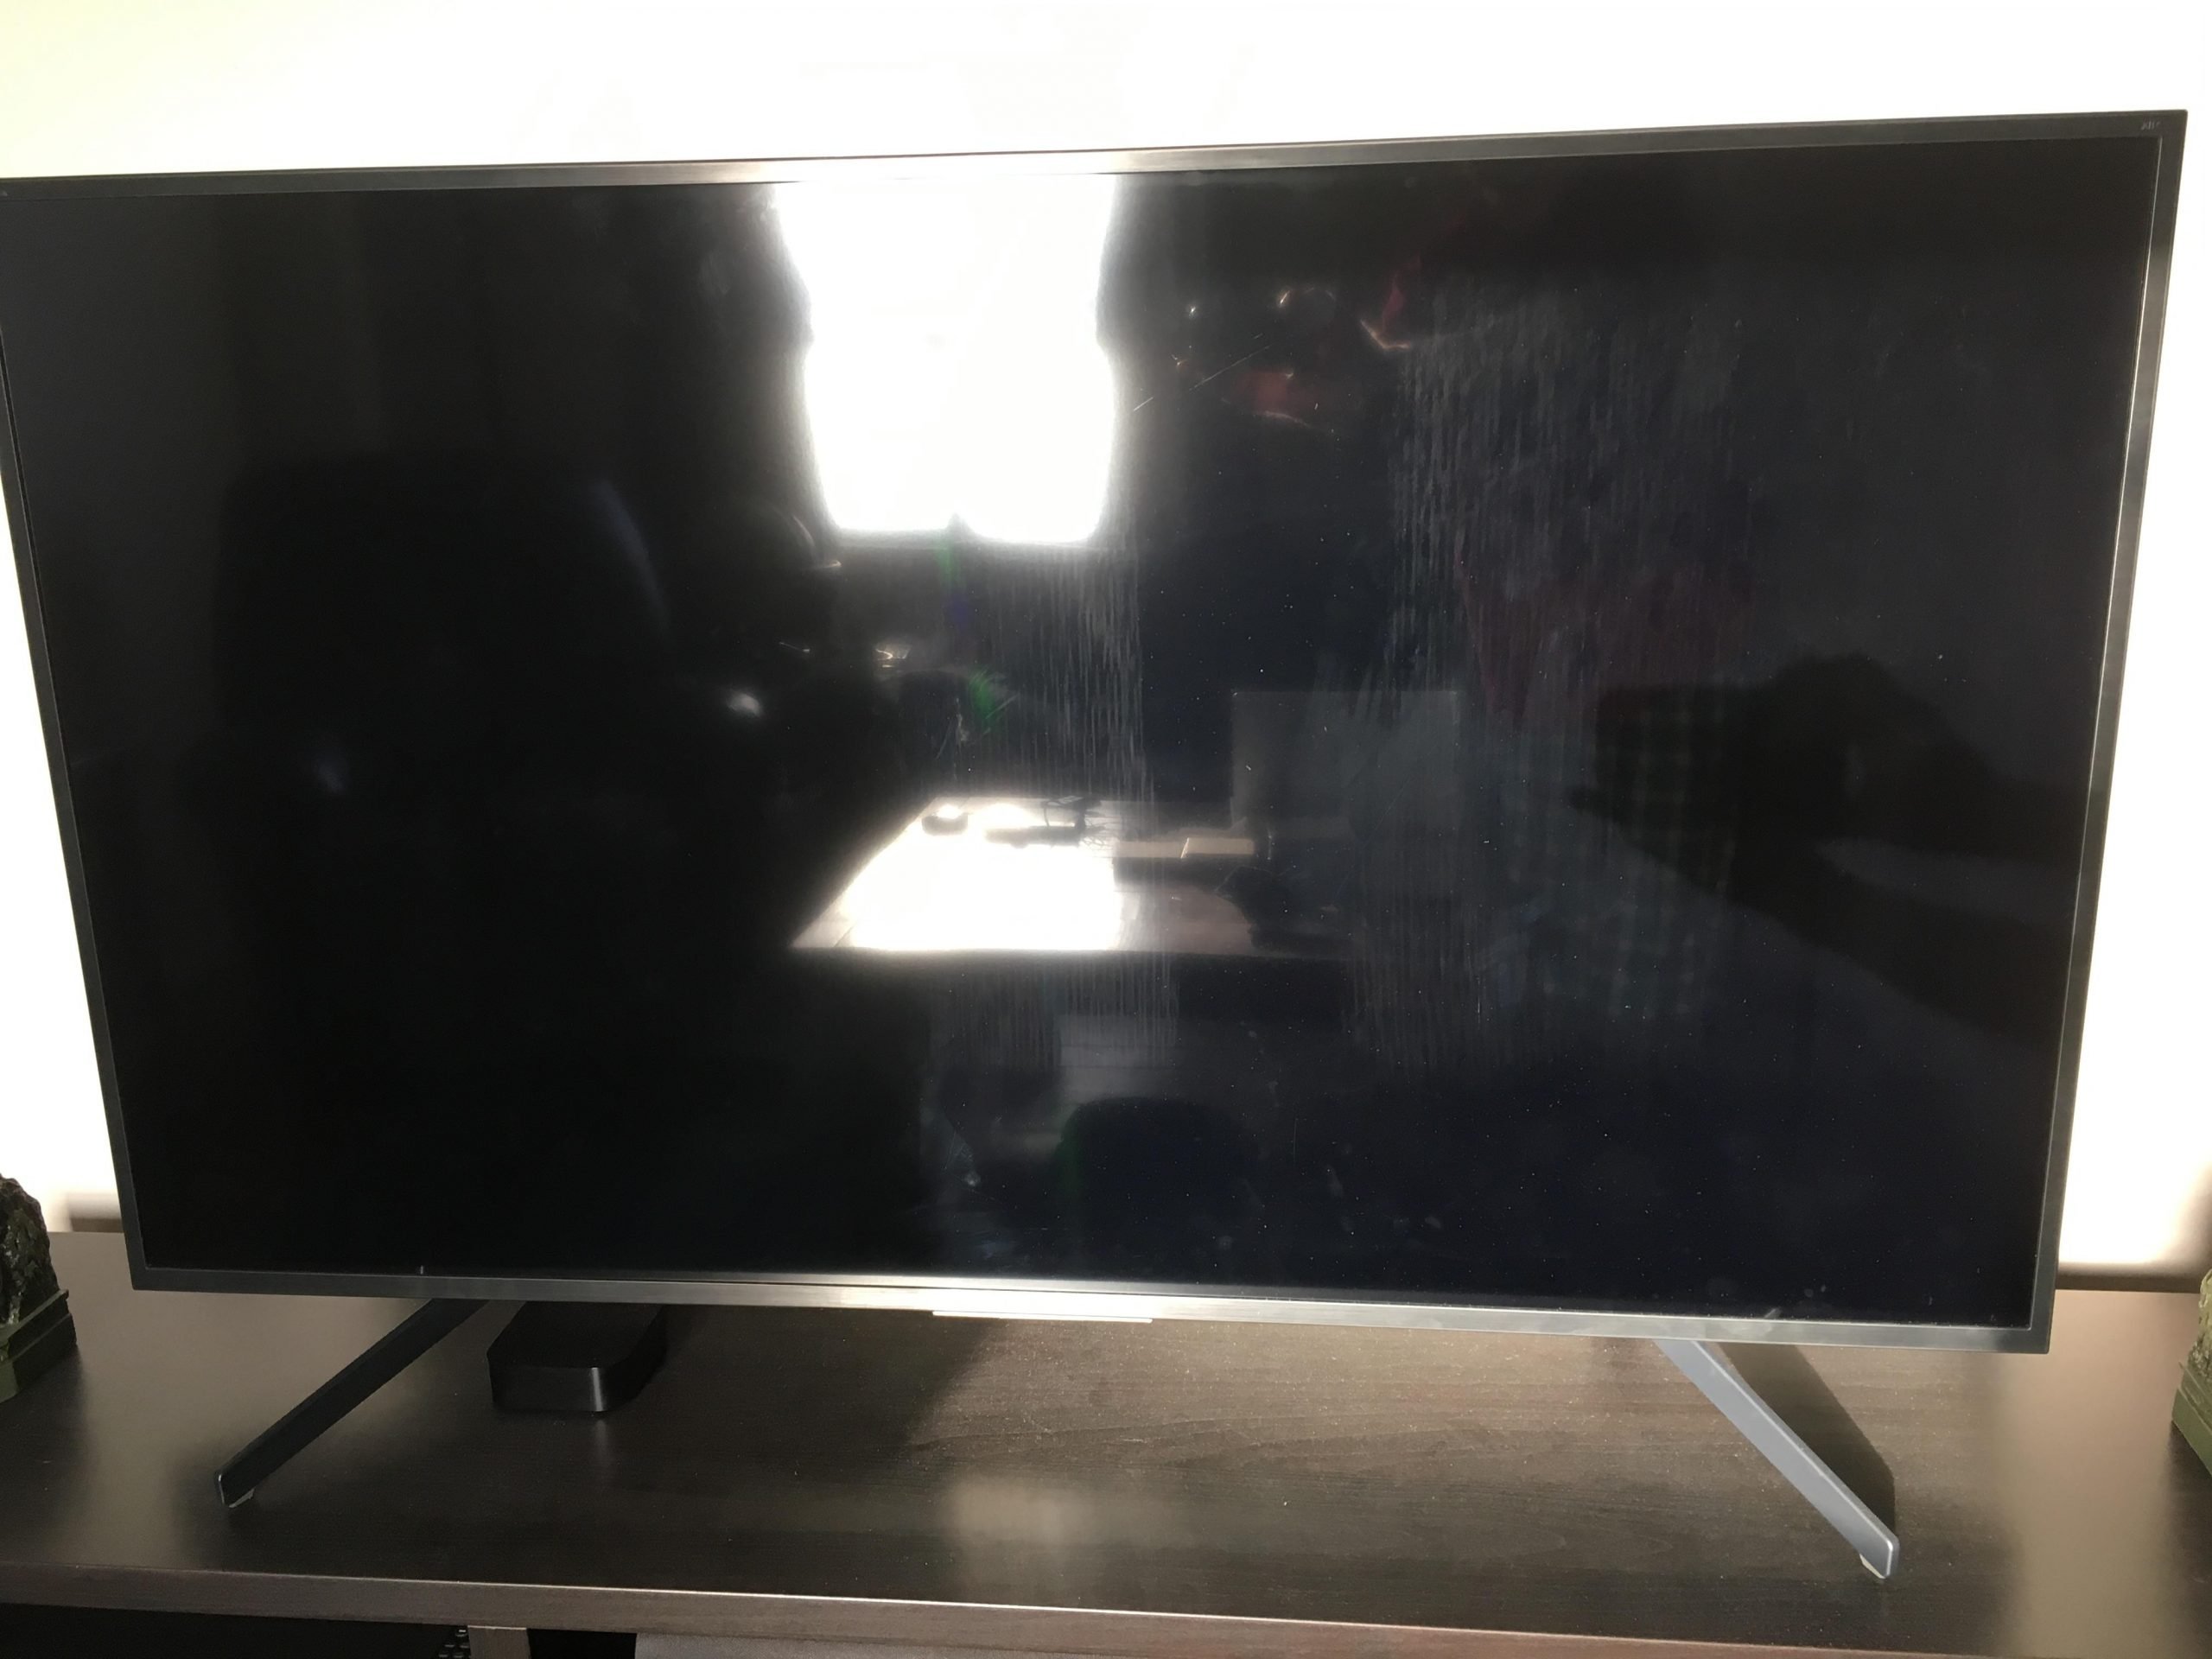 How can I properly clean my TV screen? See photo ...